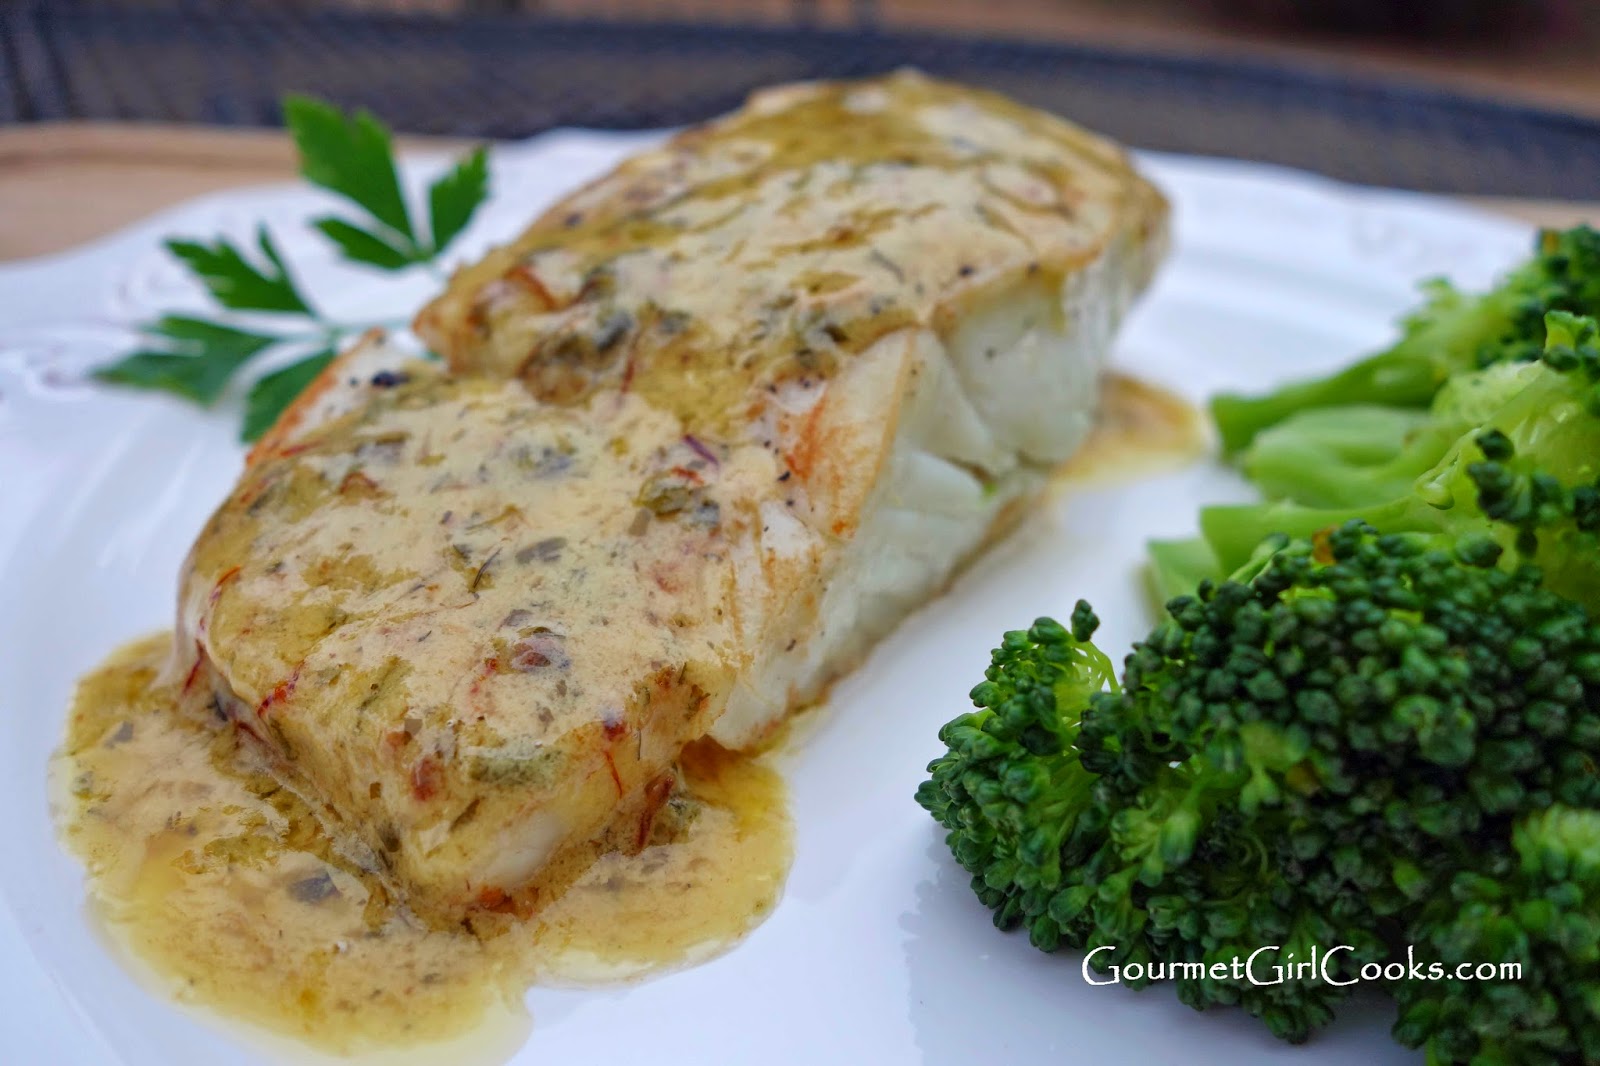 Gourmet Girl Cooks: Pan Seared Wild Pacific Halibut with Saffron Cream ...